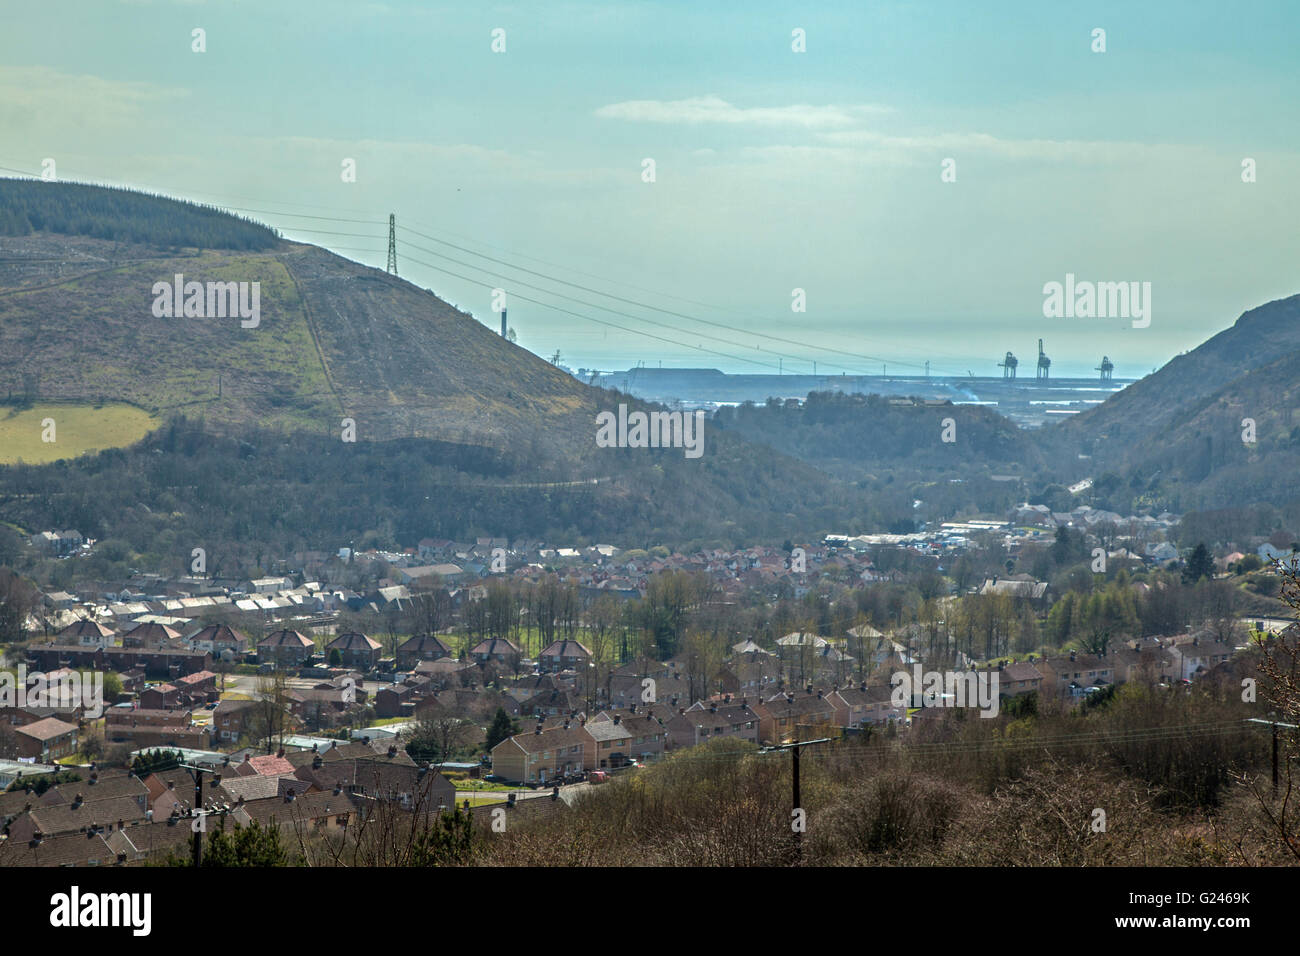 Port Talbot steel works is pictured beyond the town of Cwmafan. Stock Photo